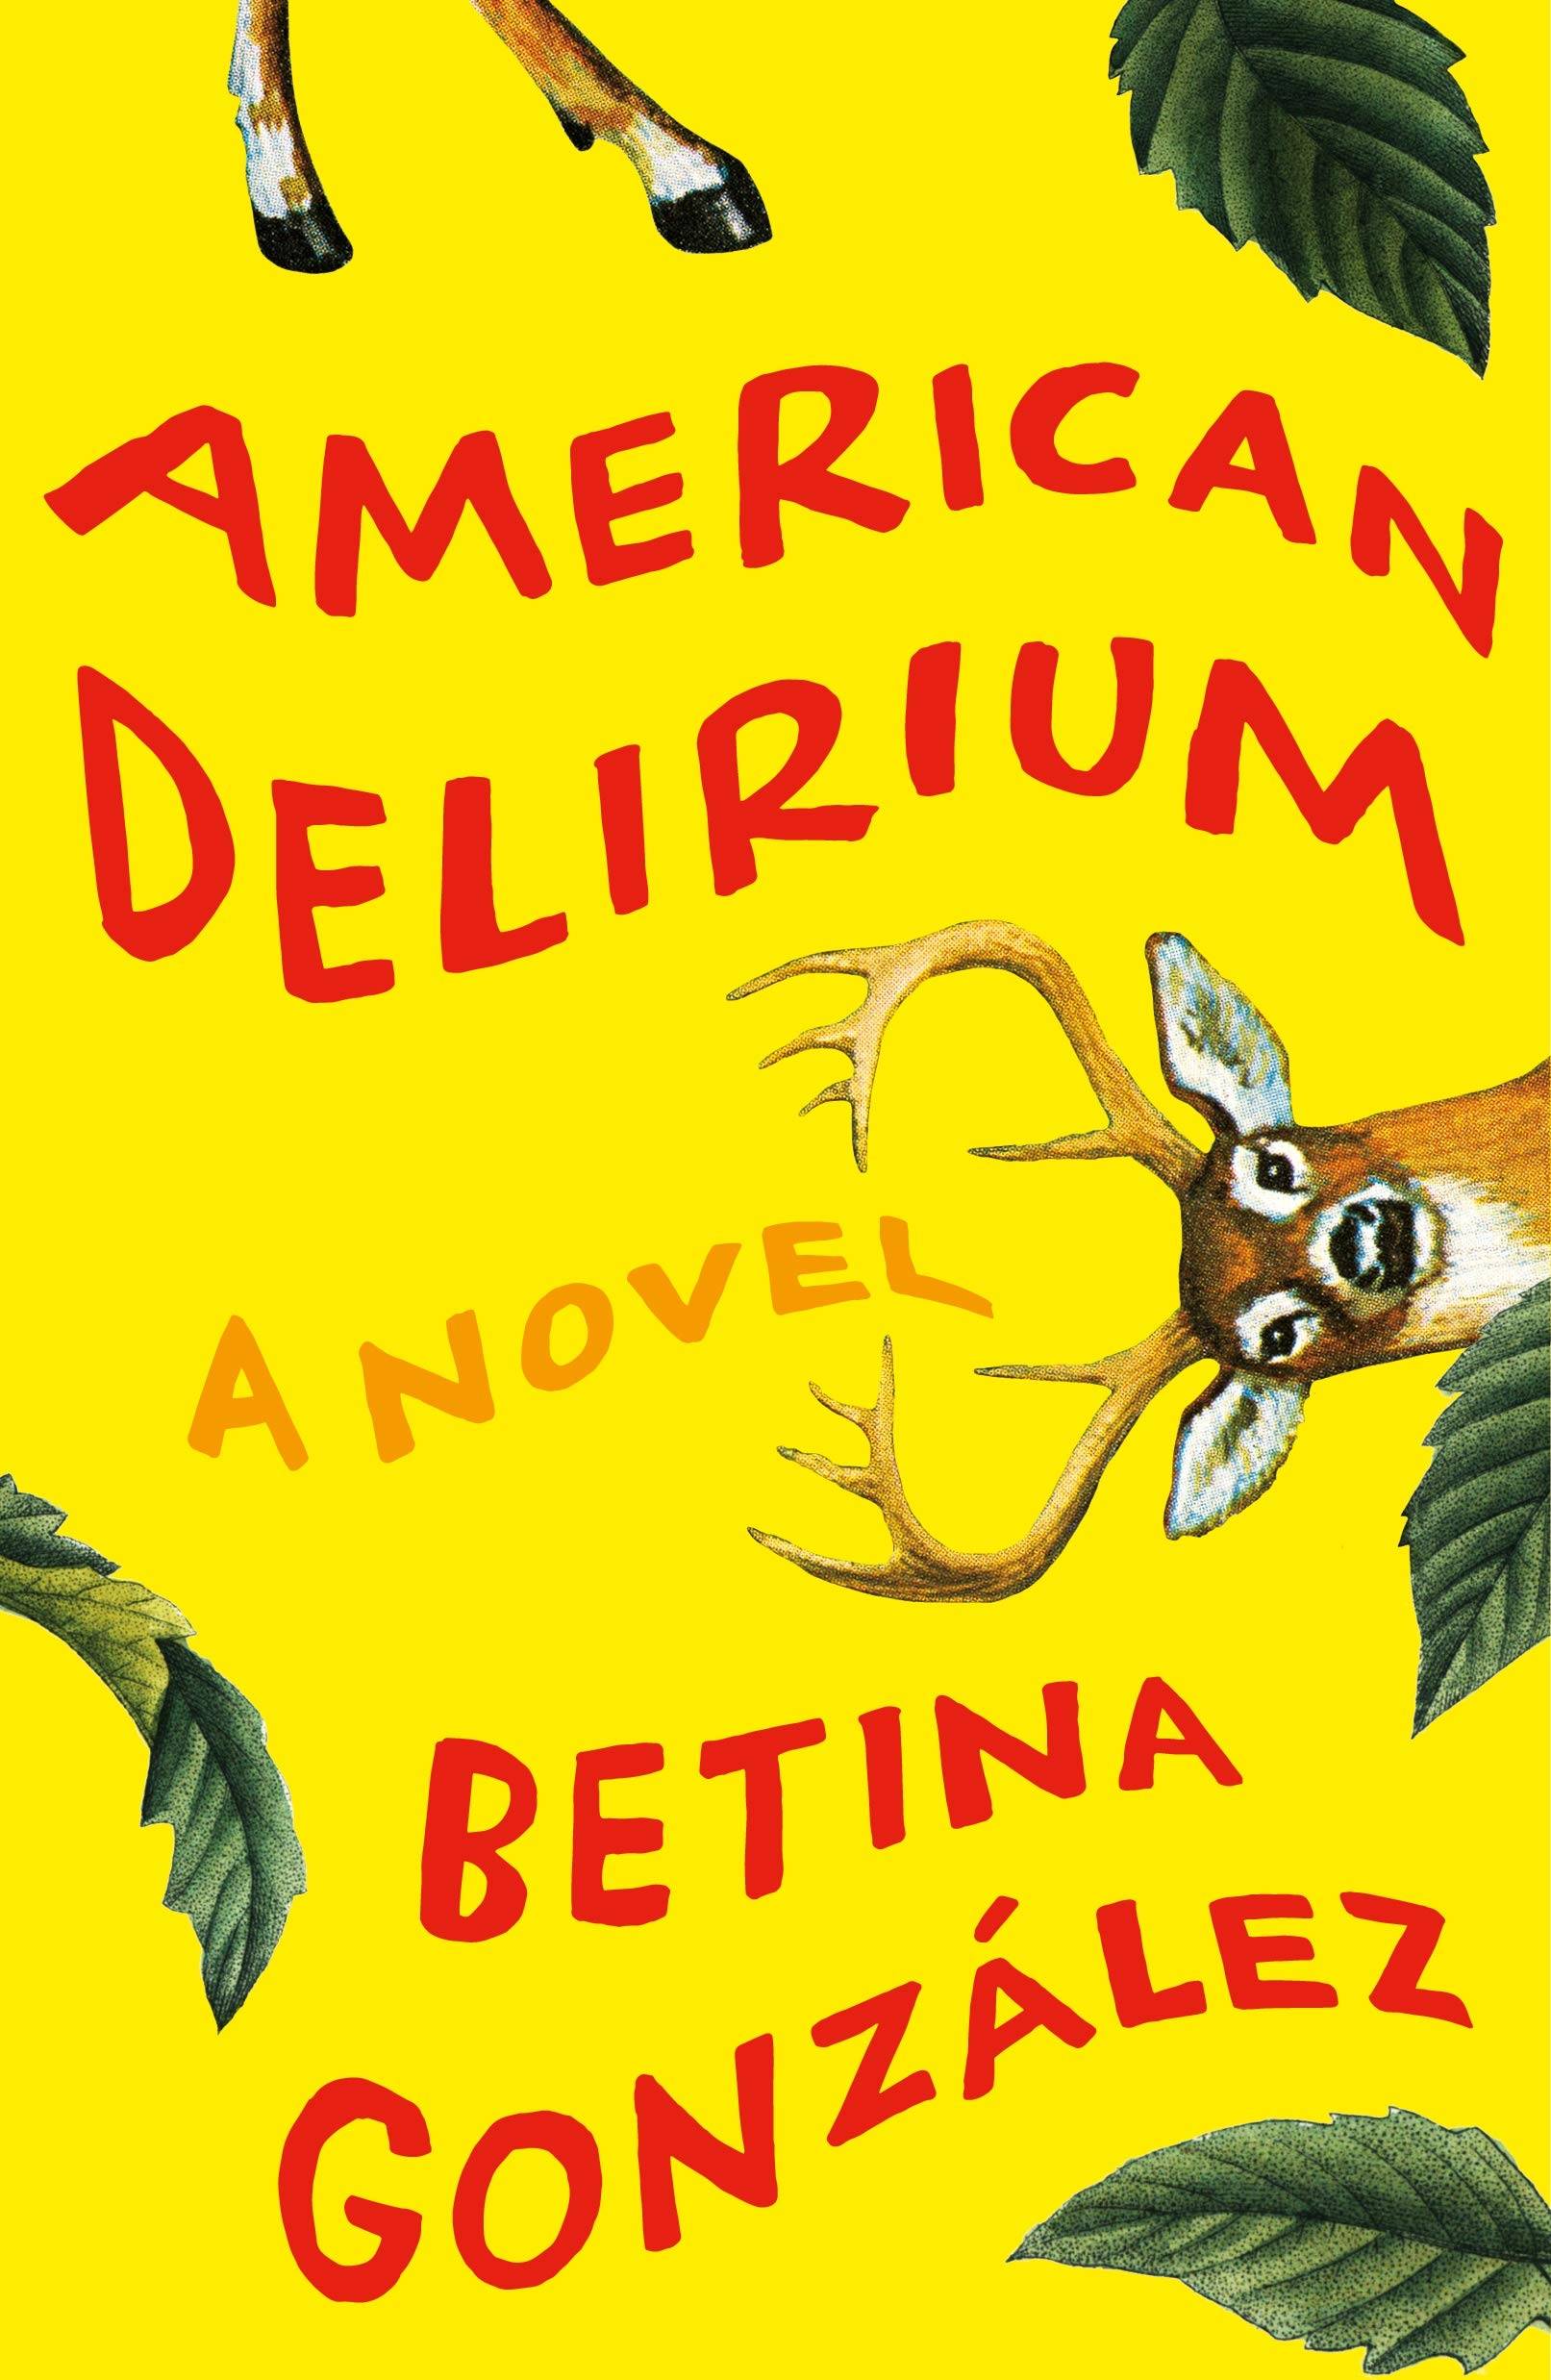 Yellow "American delirium" cover with foliage, a deer head, and deer hooves coming in from the edge of the frame.